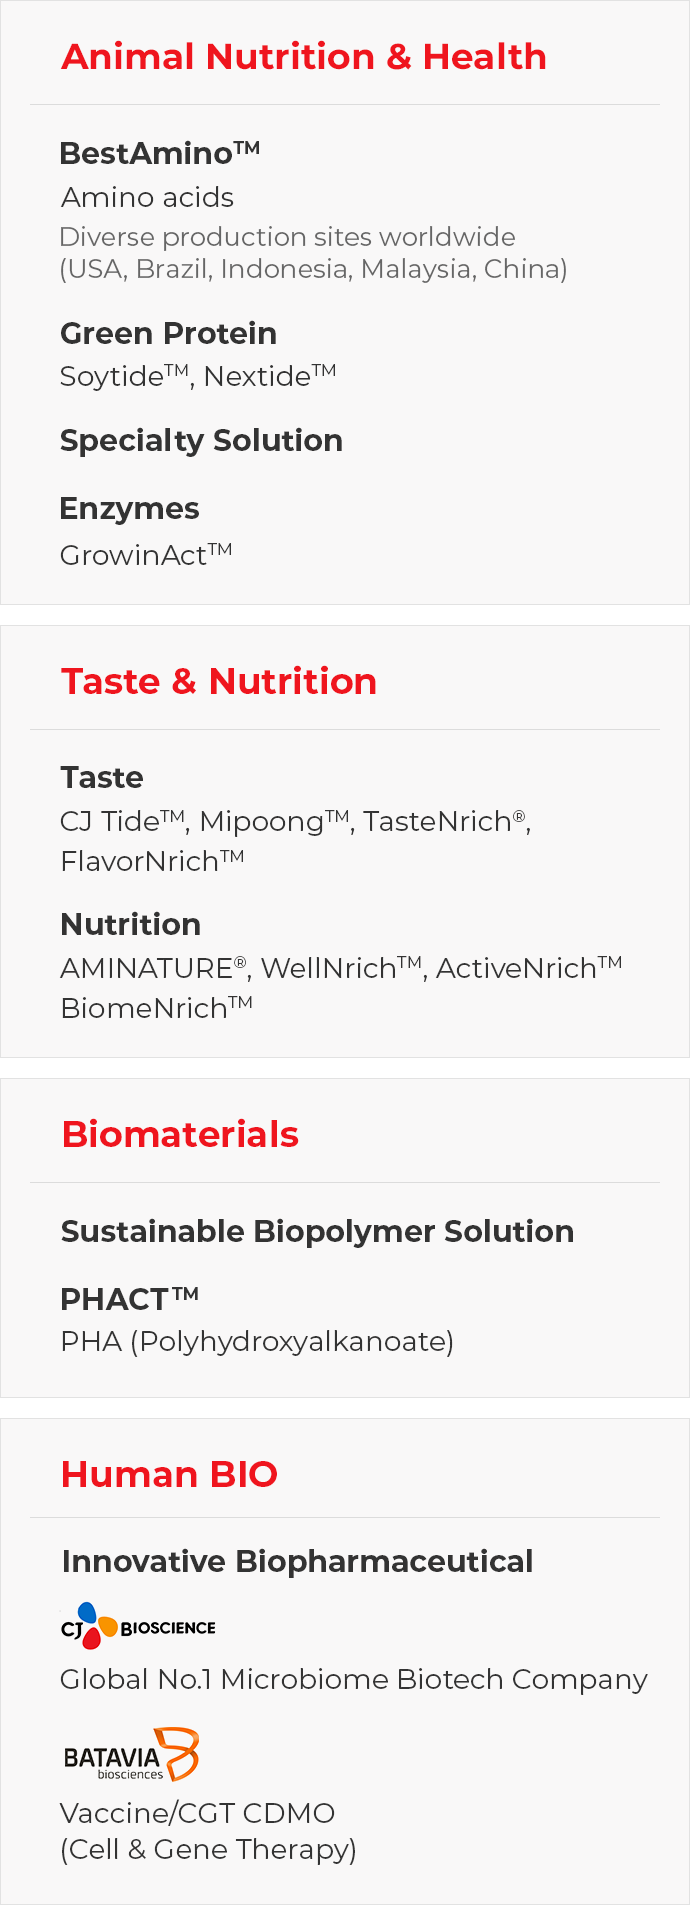 Animal Nutrition & Health, BestAmino™ - Amino acids, Diverse production sites worldwide(USA, Brazil, Indonesia, Malaysia, China), Green Protein - Soytide™, Nextide™, Specialty Solution, Enzymes - GrowinAct™, Taste & Nutrition, Taste - CJ Tide™, Mipoong™, TasteNrich®, FlavorNrich™, Nutrition - AMINATURE®, WellNrich™, ActiveNrich™, BiomeNrich™, Biomaterials, Sustainable Biopolymer Solution, PHACT™ - PHA (Polyhydroxyalkanoate), Human BIO, Innovative Biopharmaceutical, CJ Bioscience - Global No.1 Microbiome Biotech Company, BATAVIA - Vaccine/CGT CDMO(Cell & Gene Therapy)